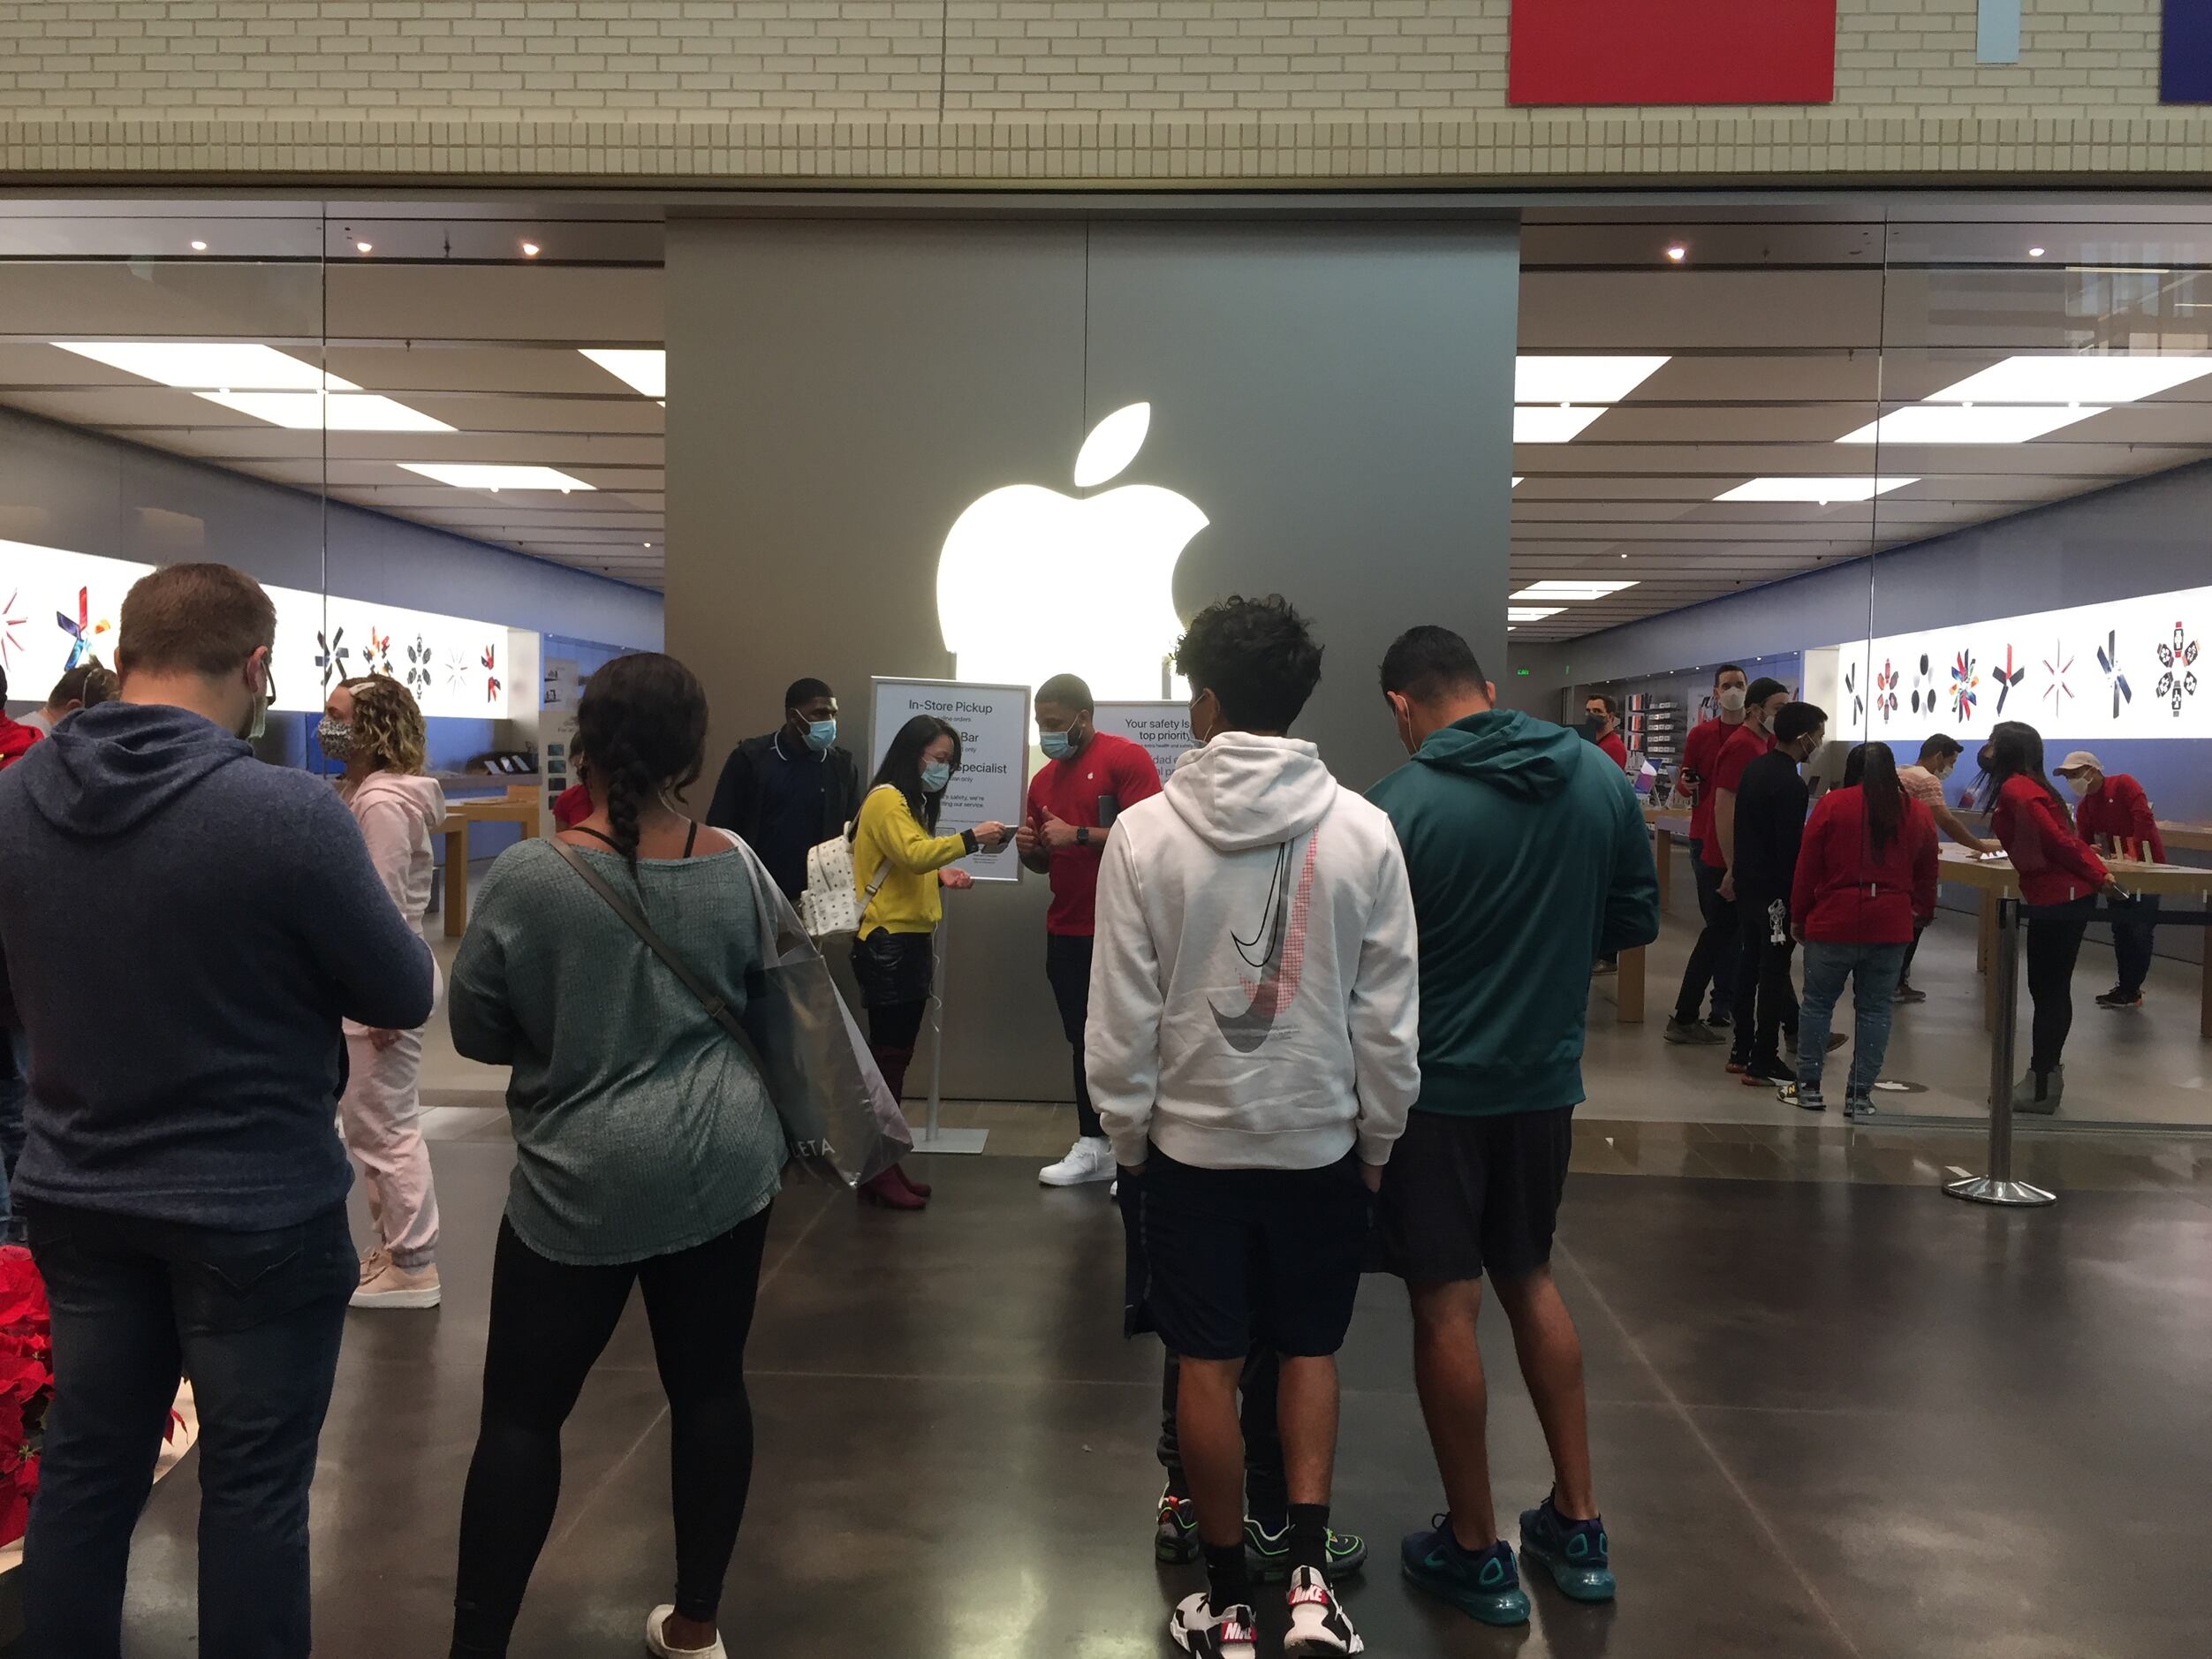 Apple reopens 5 stores with limited service in Dallas-Fort Worth